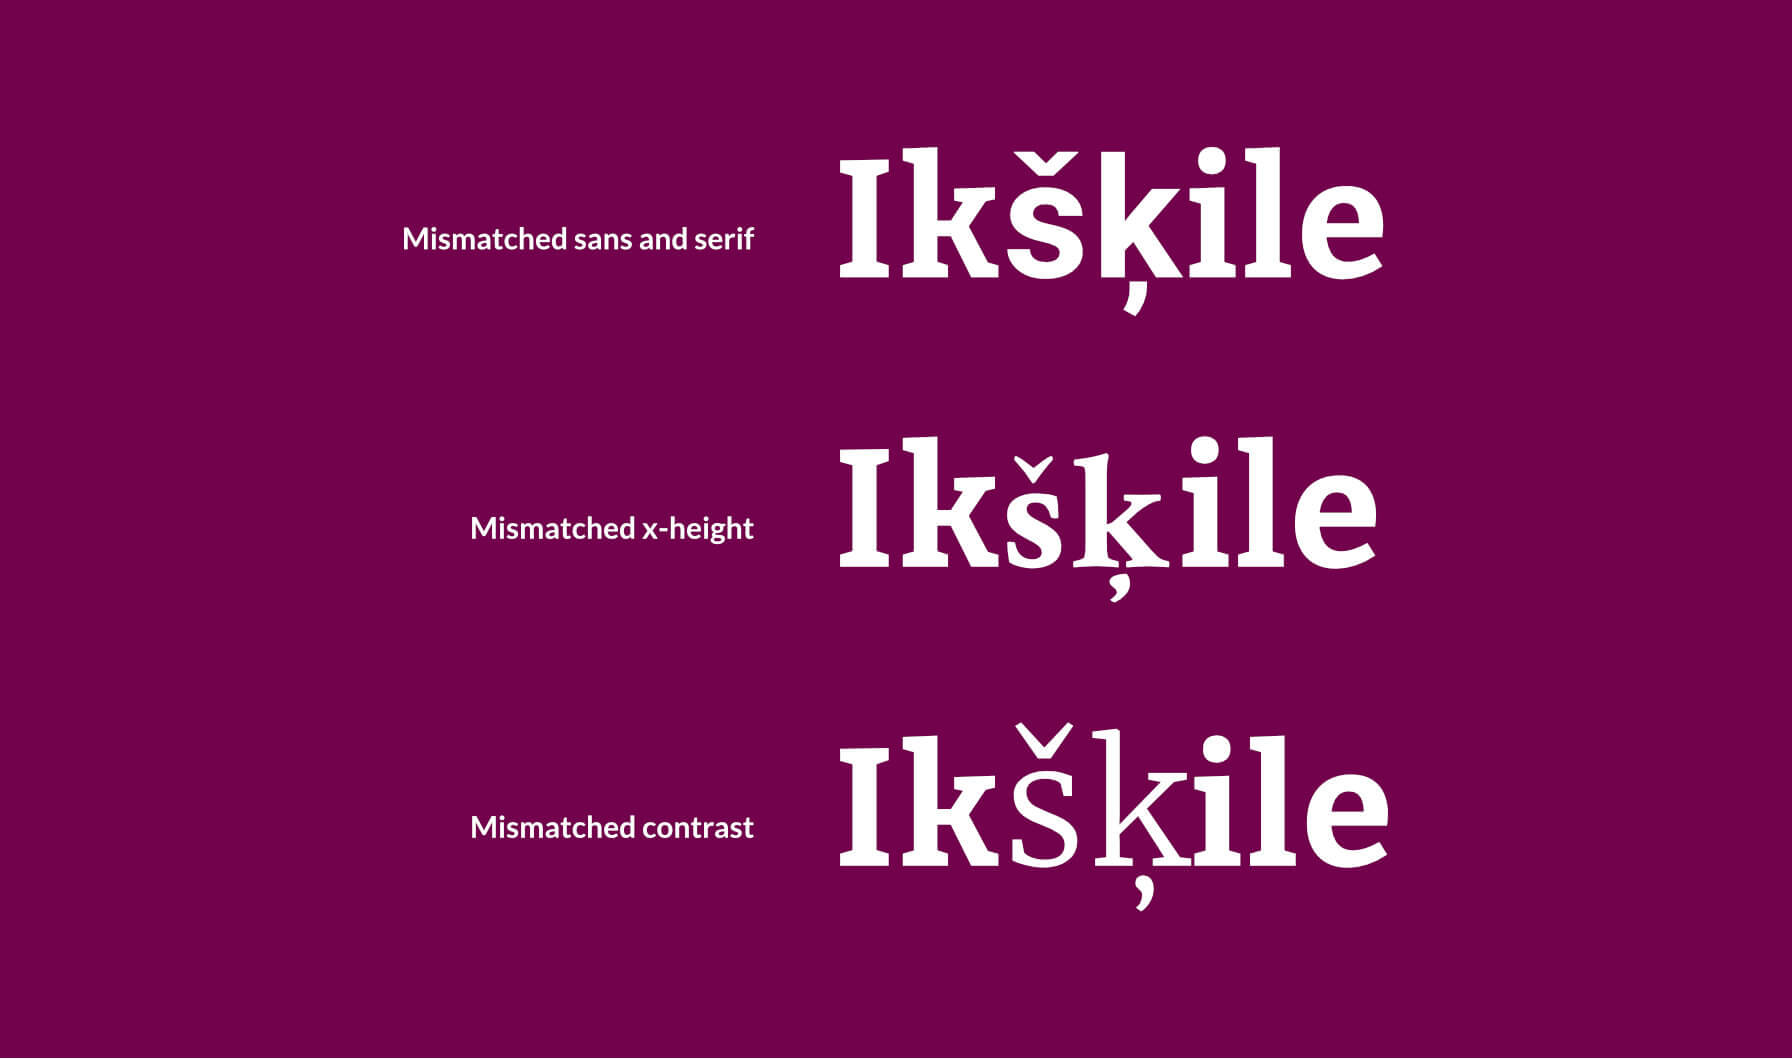 A demonstration of the text 'Ikšķile' rendered with fallbacks for diacritics. The first example shows mismatched sans and serif. The second shows mismatched x-height. The third and final shows mismatched contrast.